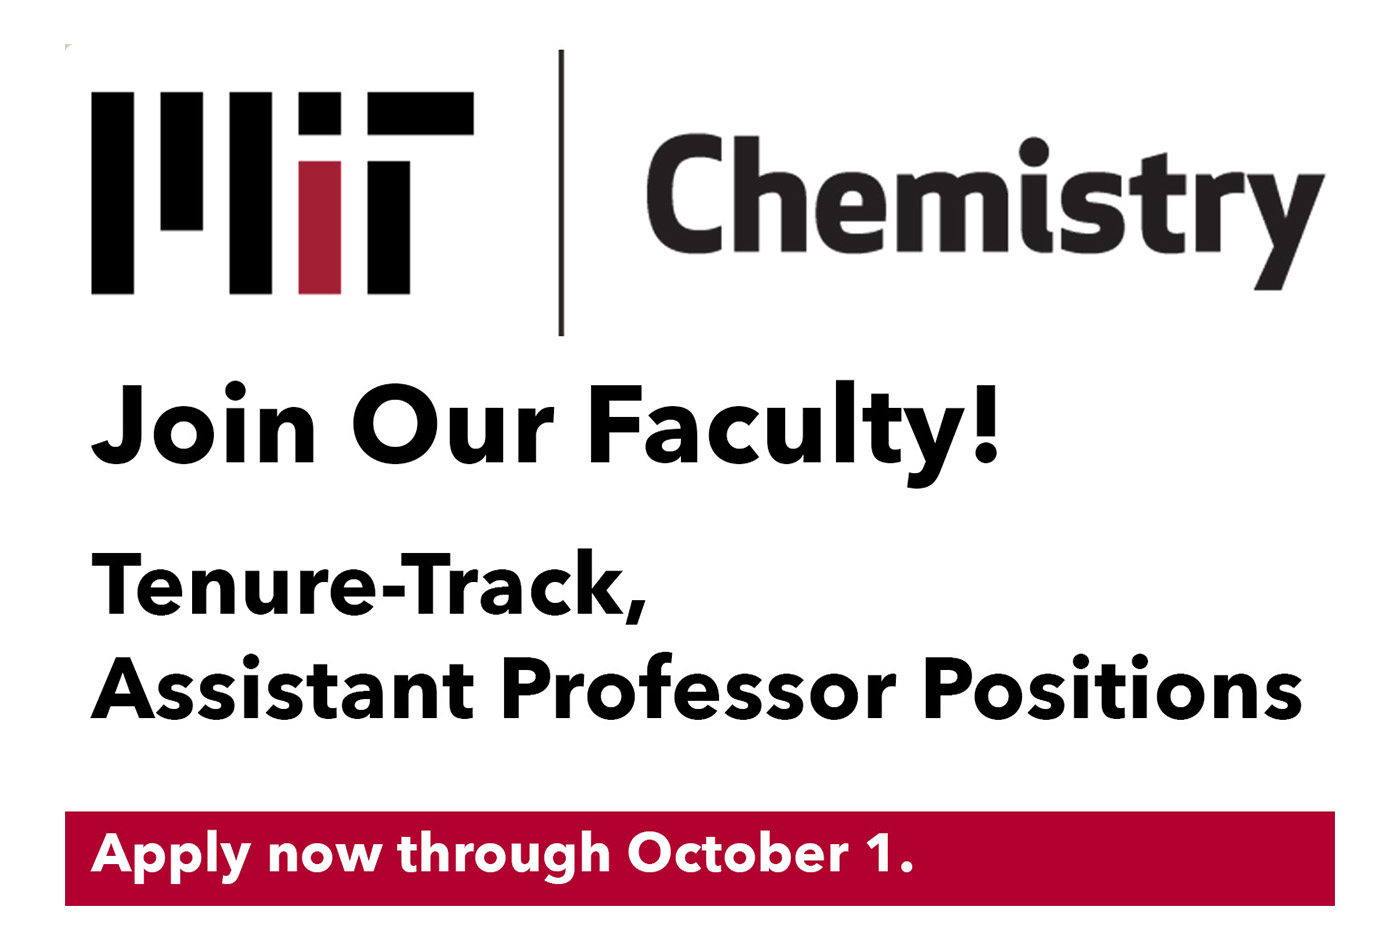 Join Our Faculty! Tenure Track, Assistant Professor Positions Available. Apply now through October 1.